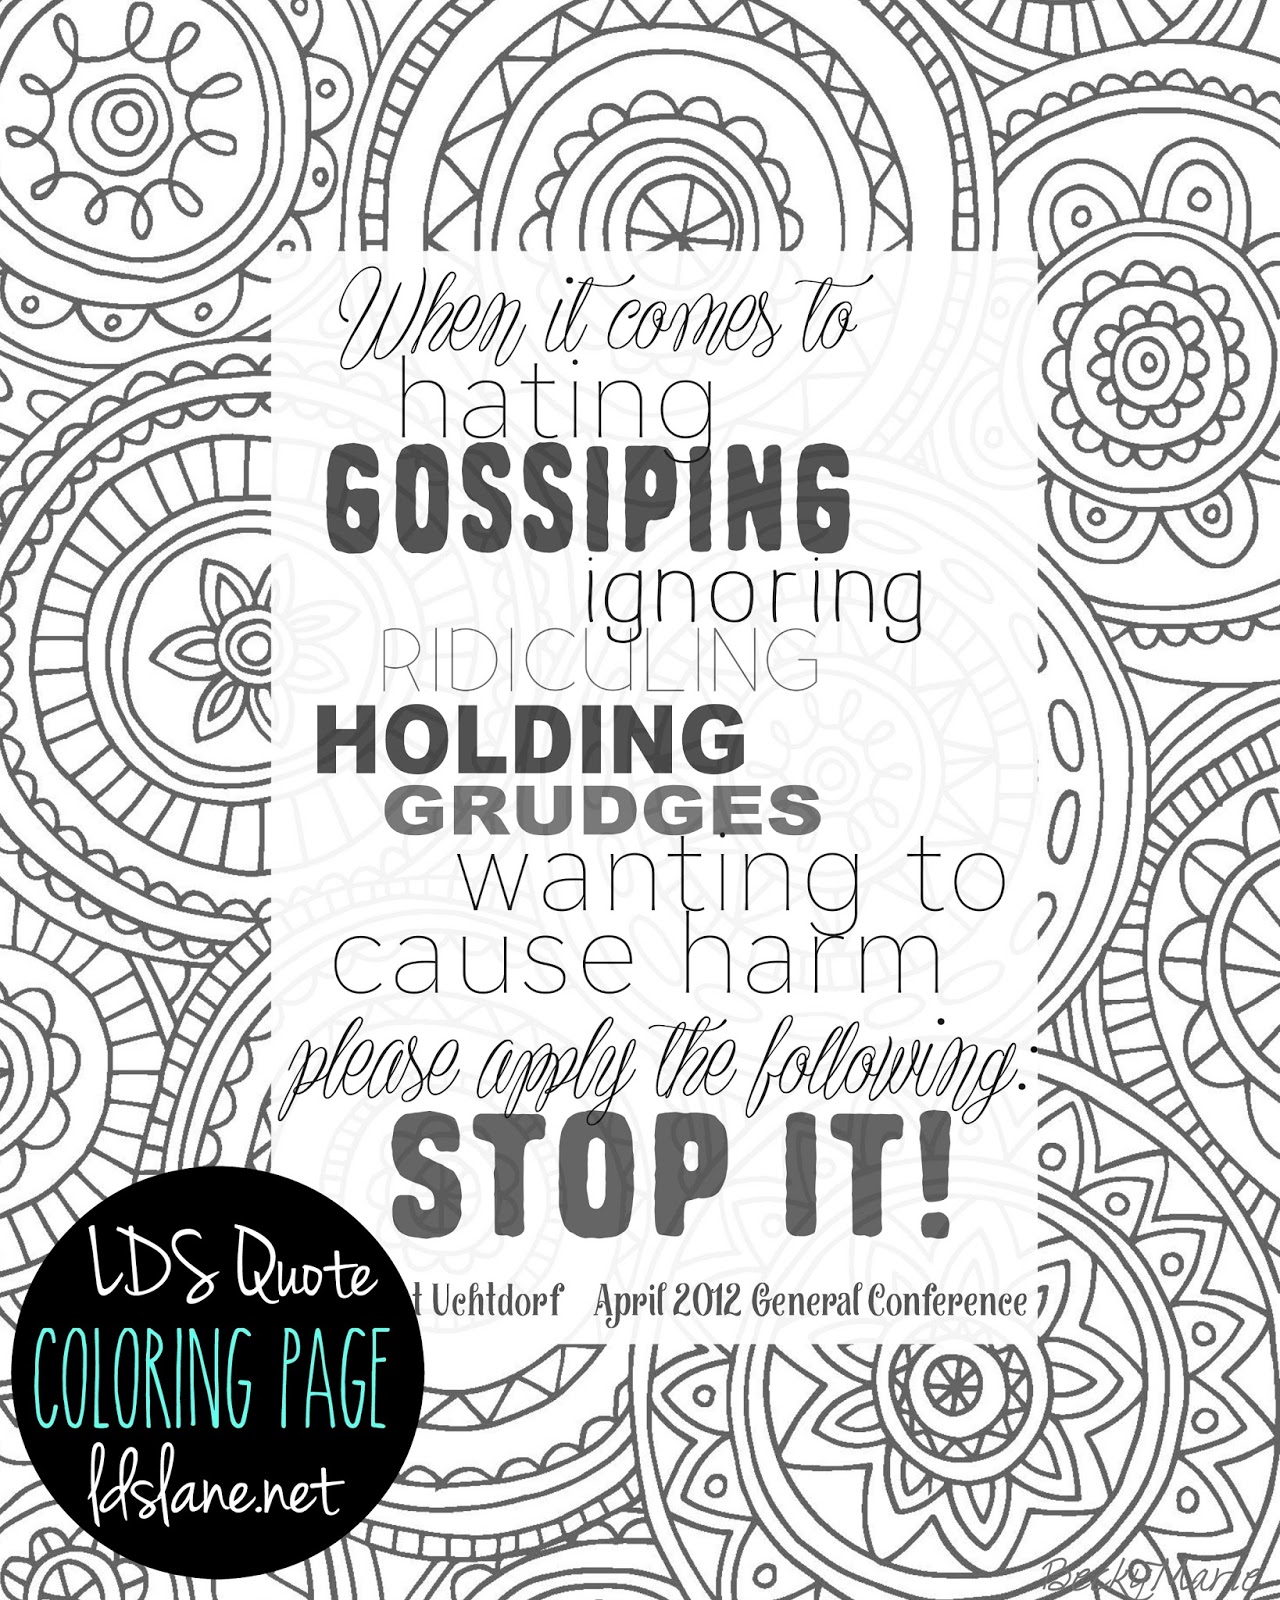 LDS Quote Coloring Page free printable ldslane